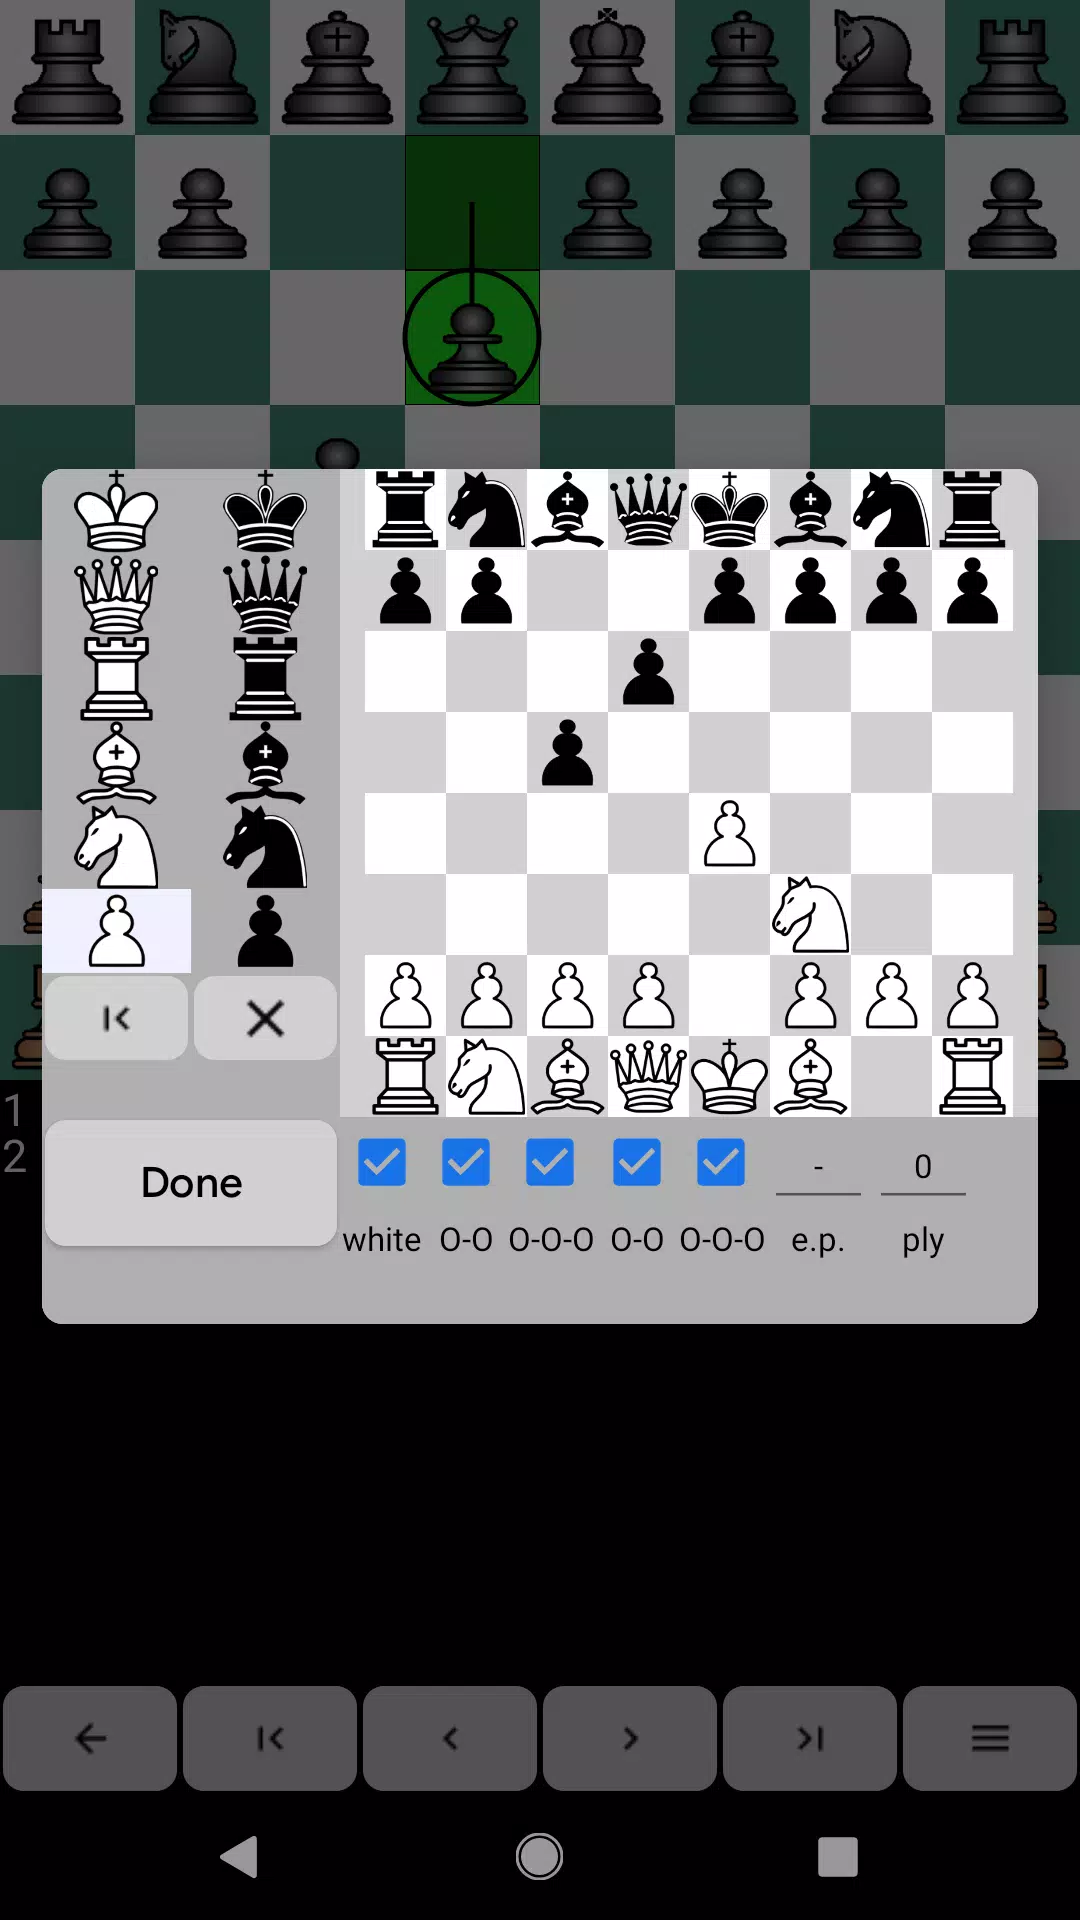 Chessle APK (Android Game) - Free Download